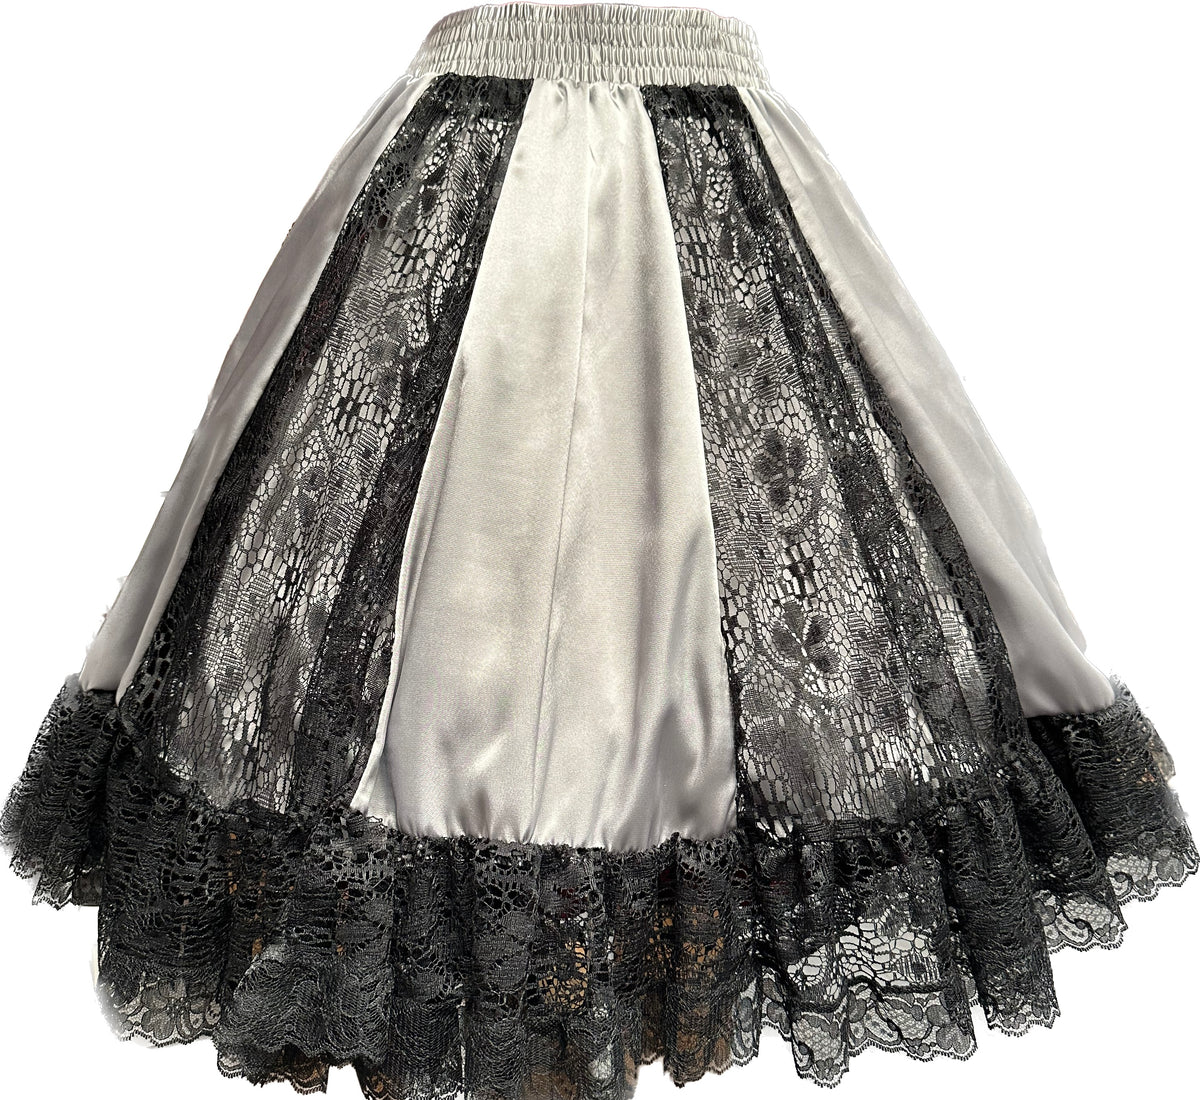 A black and white lace-trimmed Charmeuse Square Dance Skirt made by Square Up Fashions.